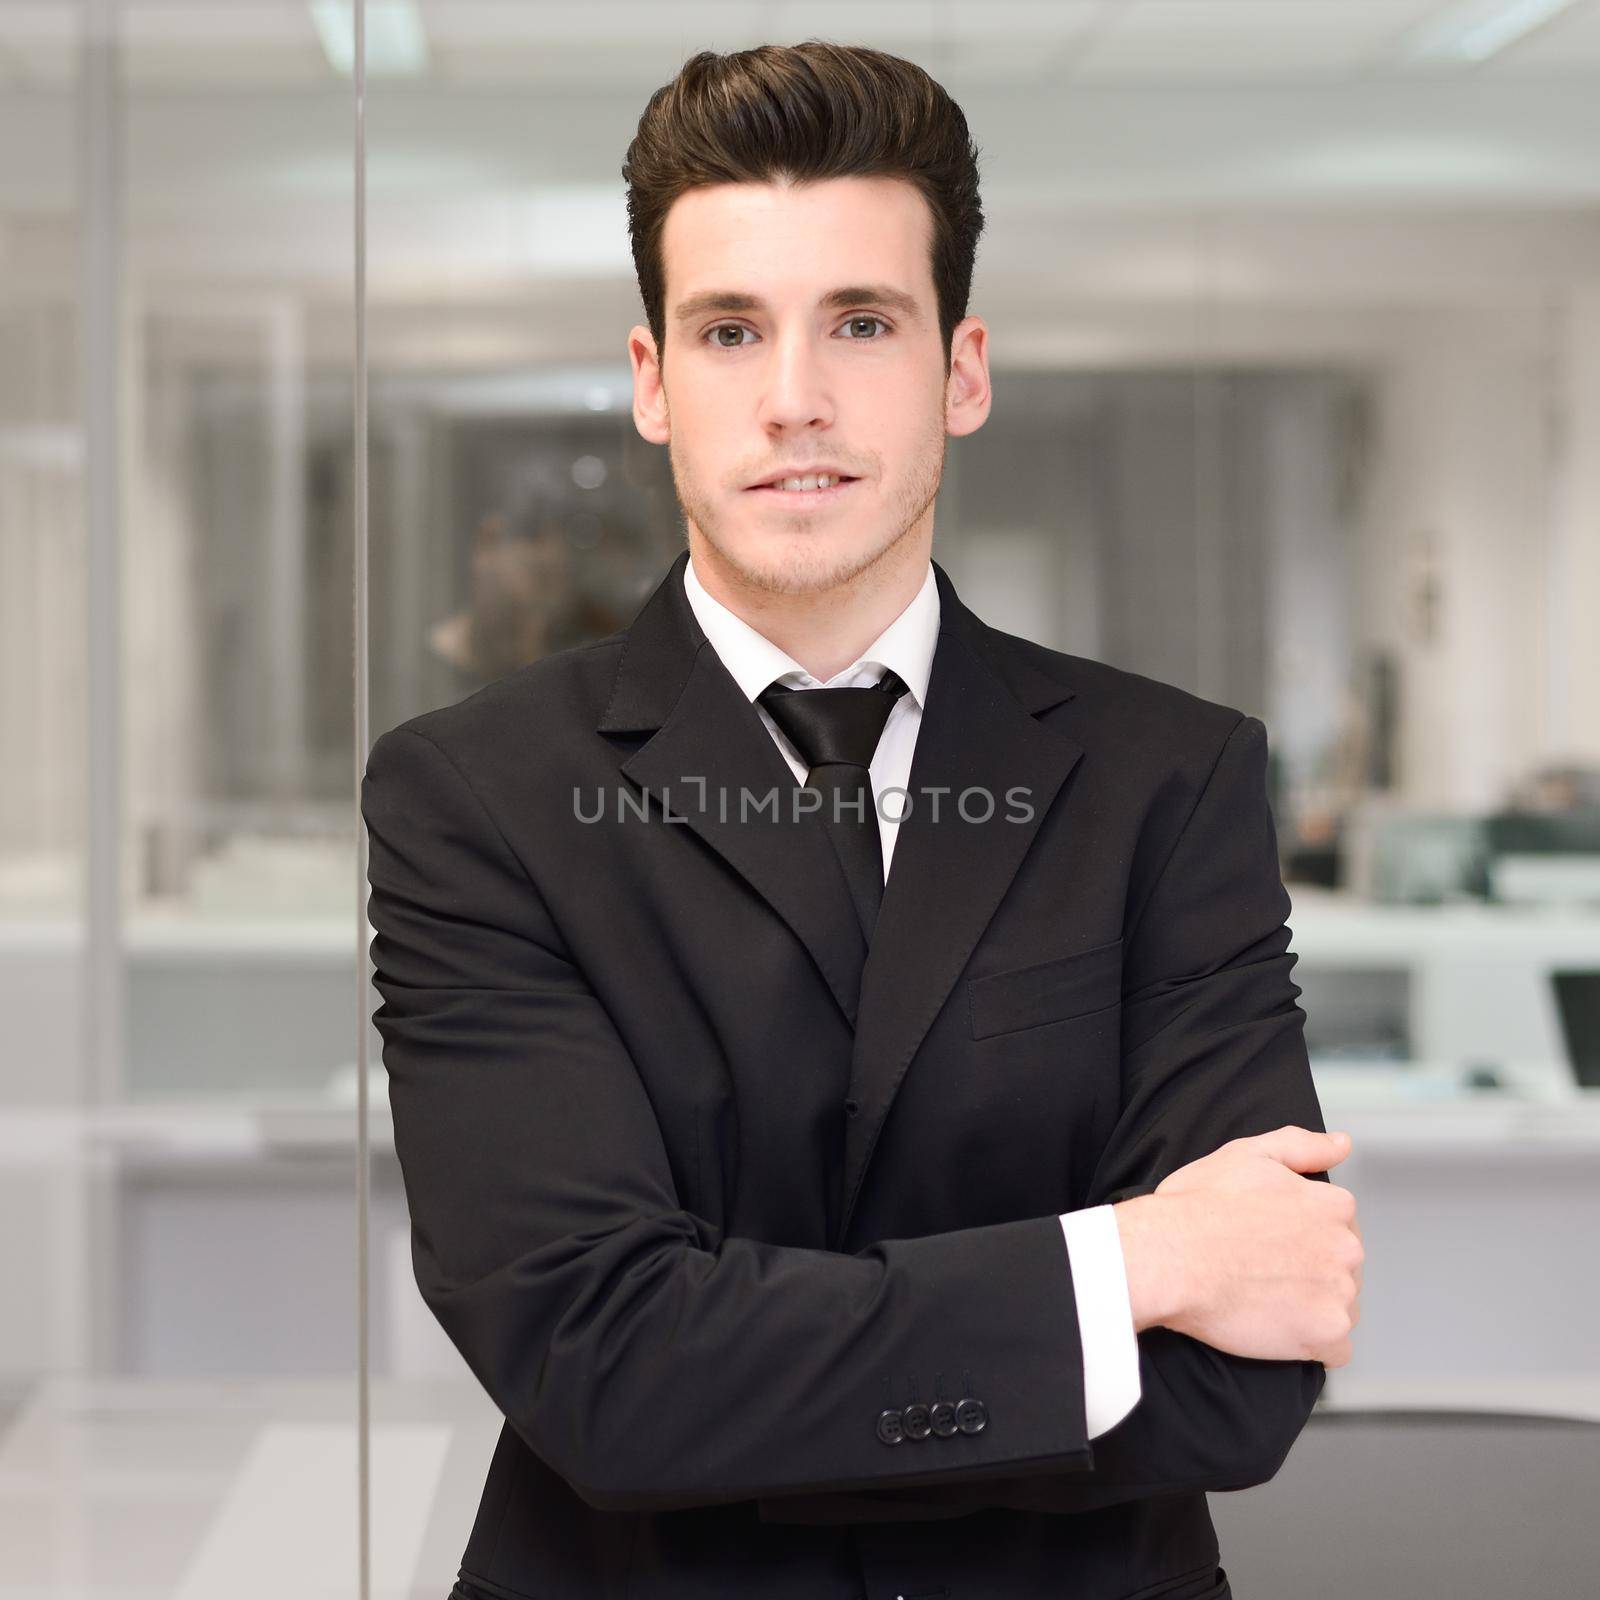 Portrait of a young businessman in an office